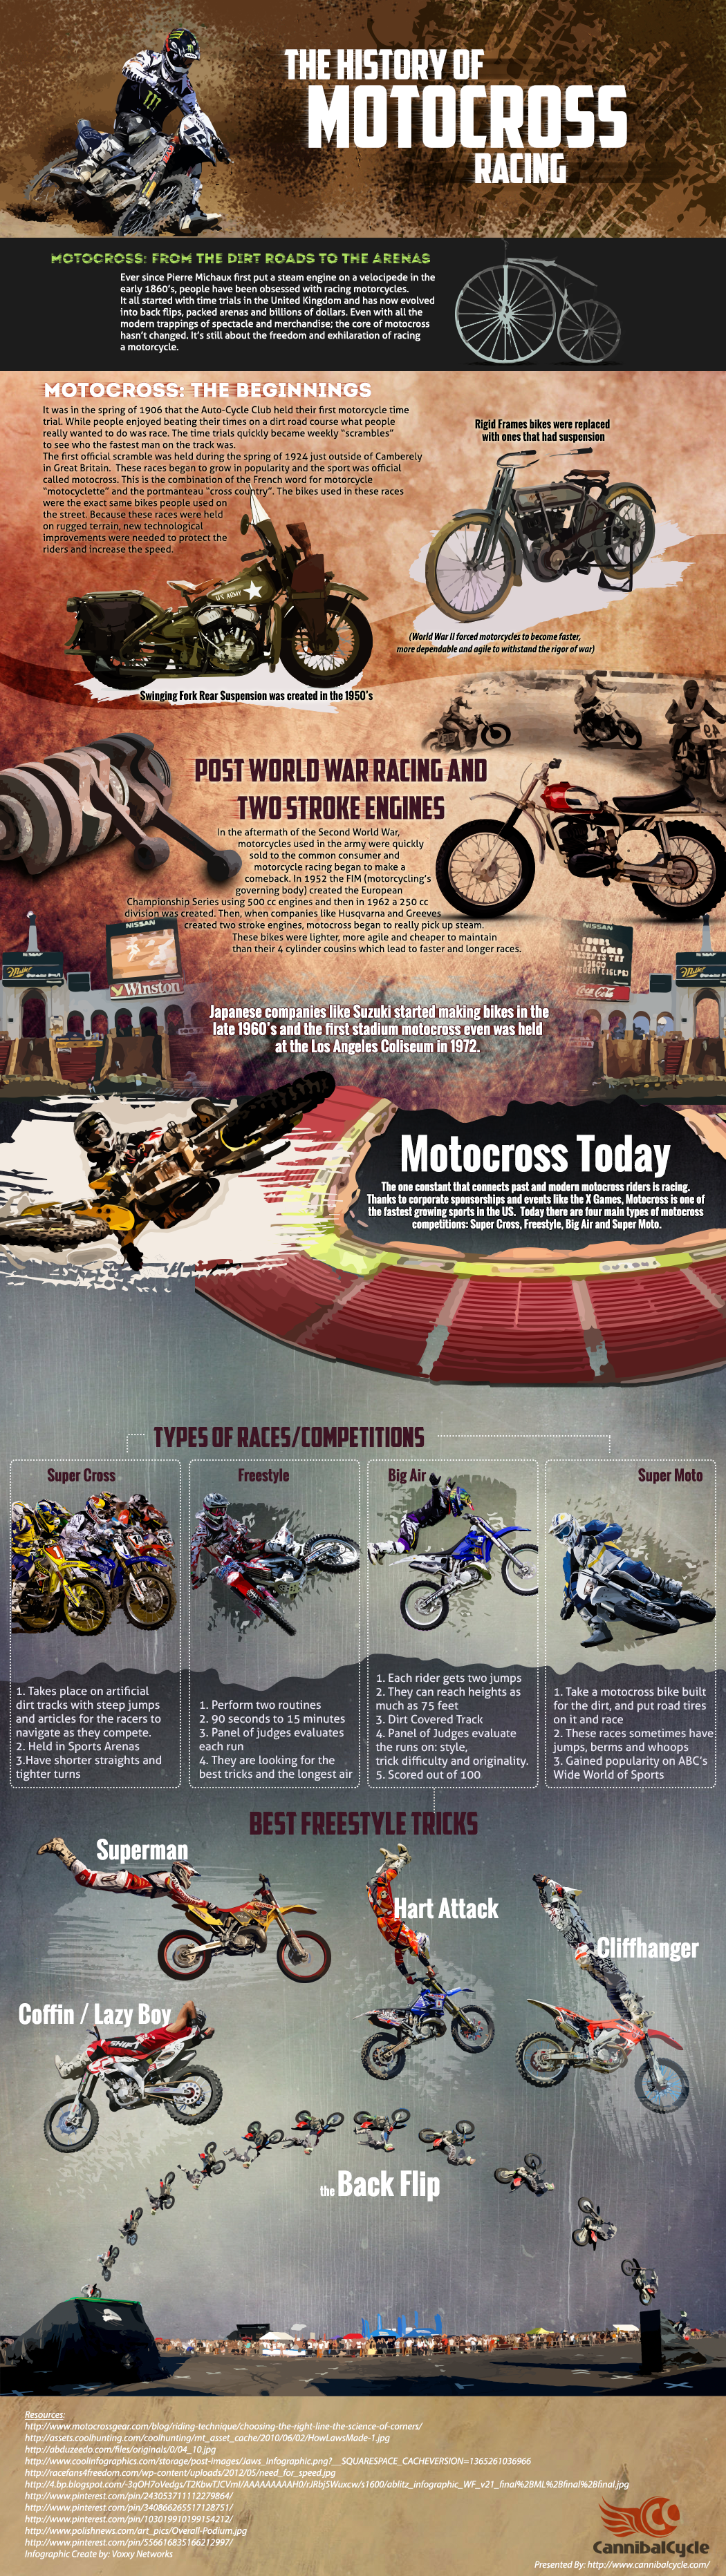 The History of Motocross Racing